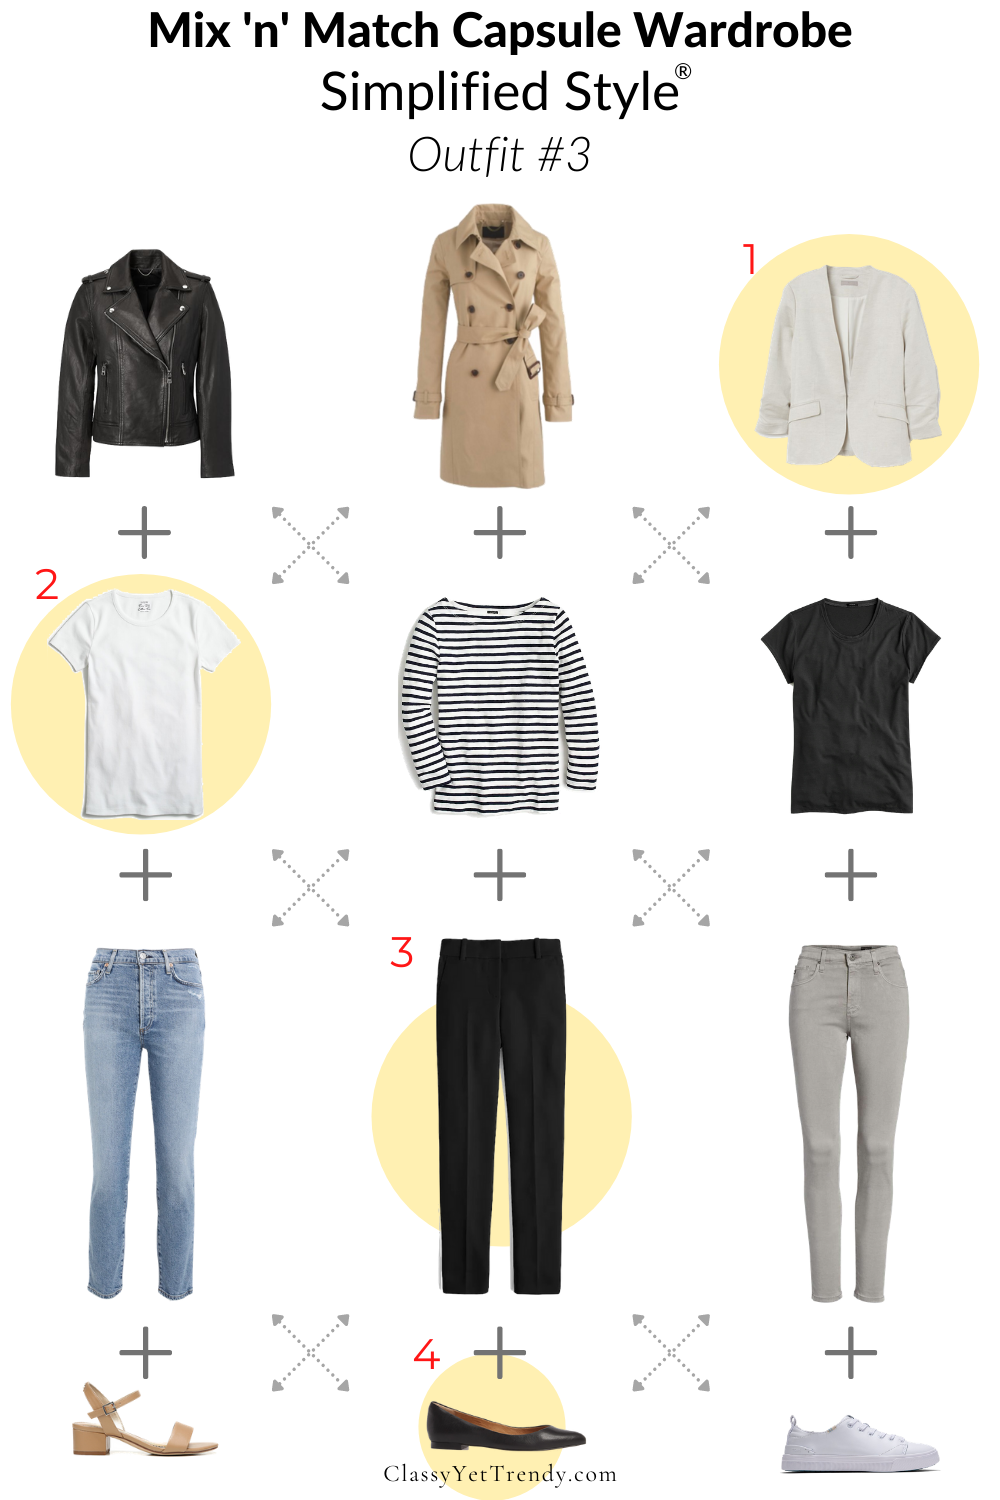 How to Build a Winter Capsule Wardrobe You Love